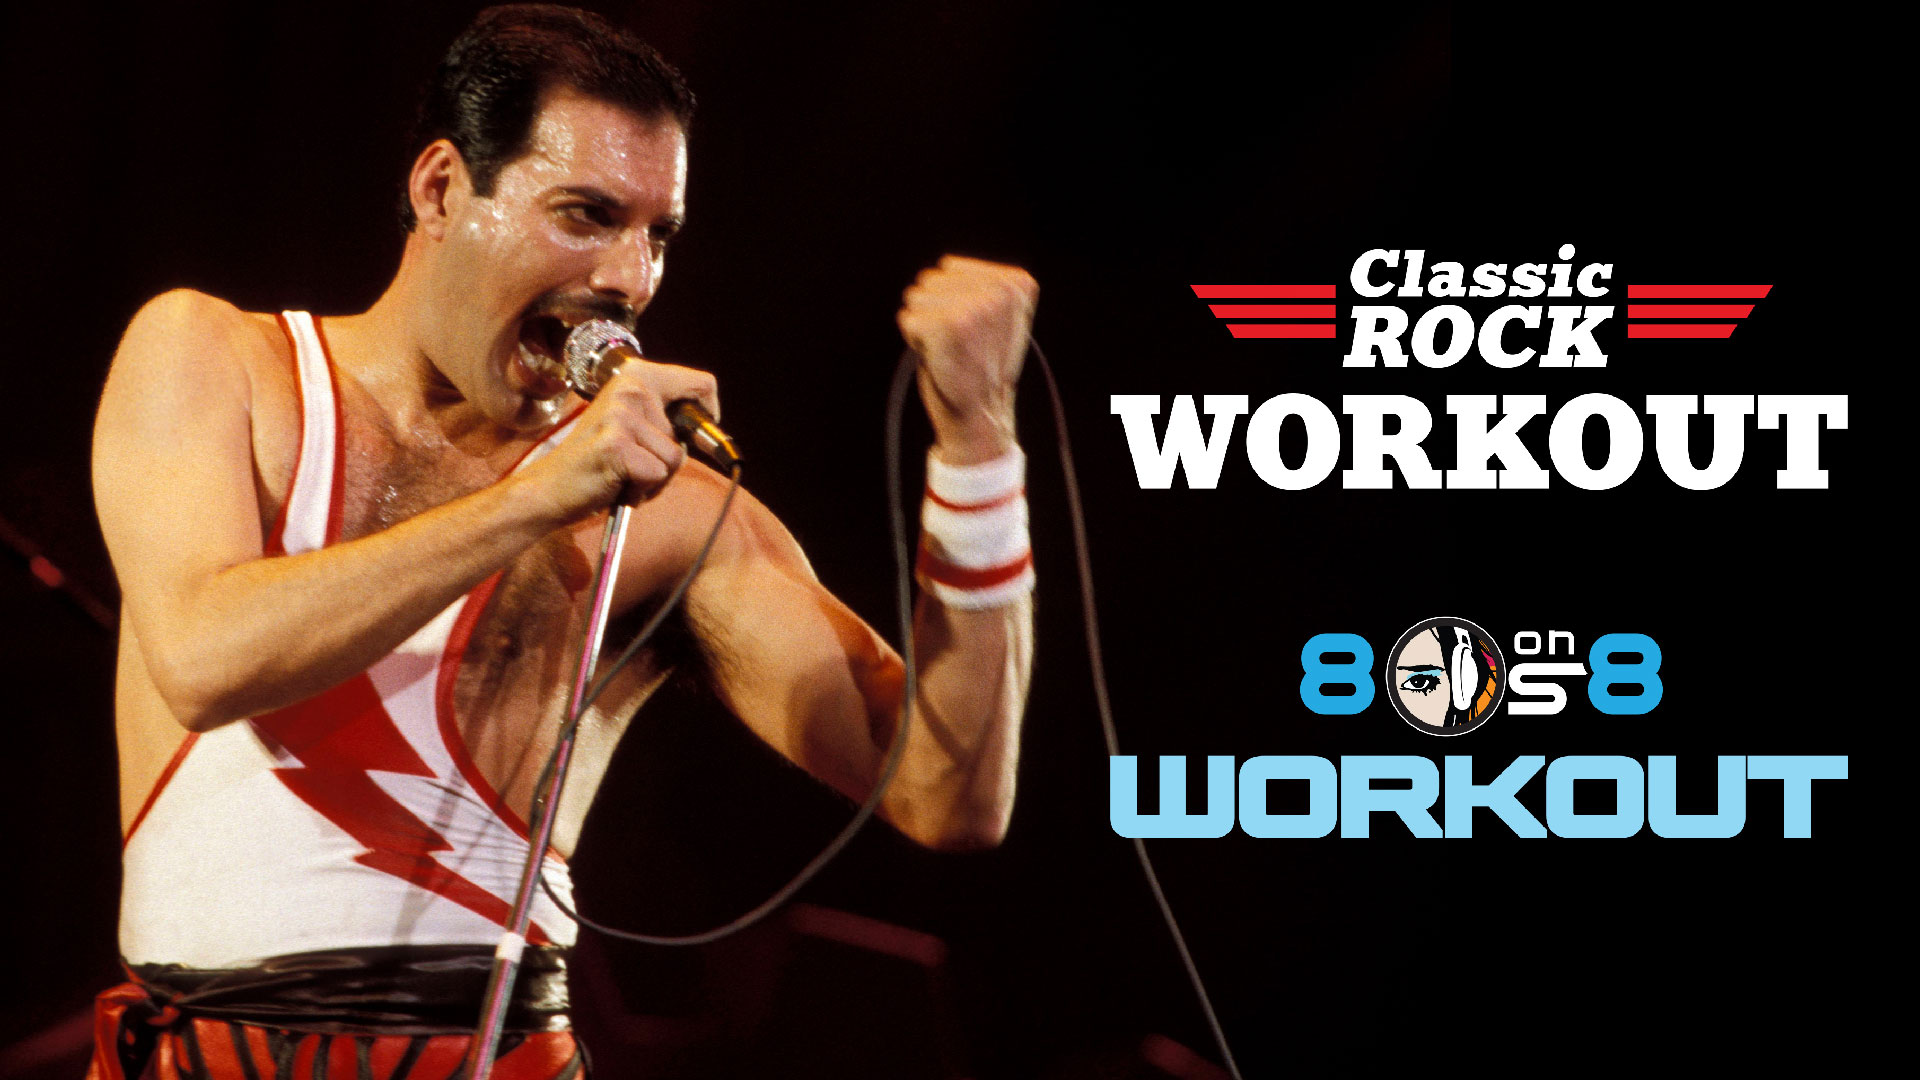 SiriusXM Classic Rock Workout and 80s on 8 Workout